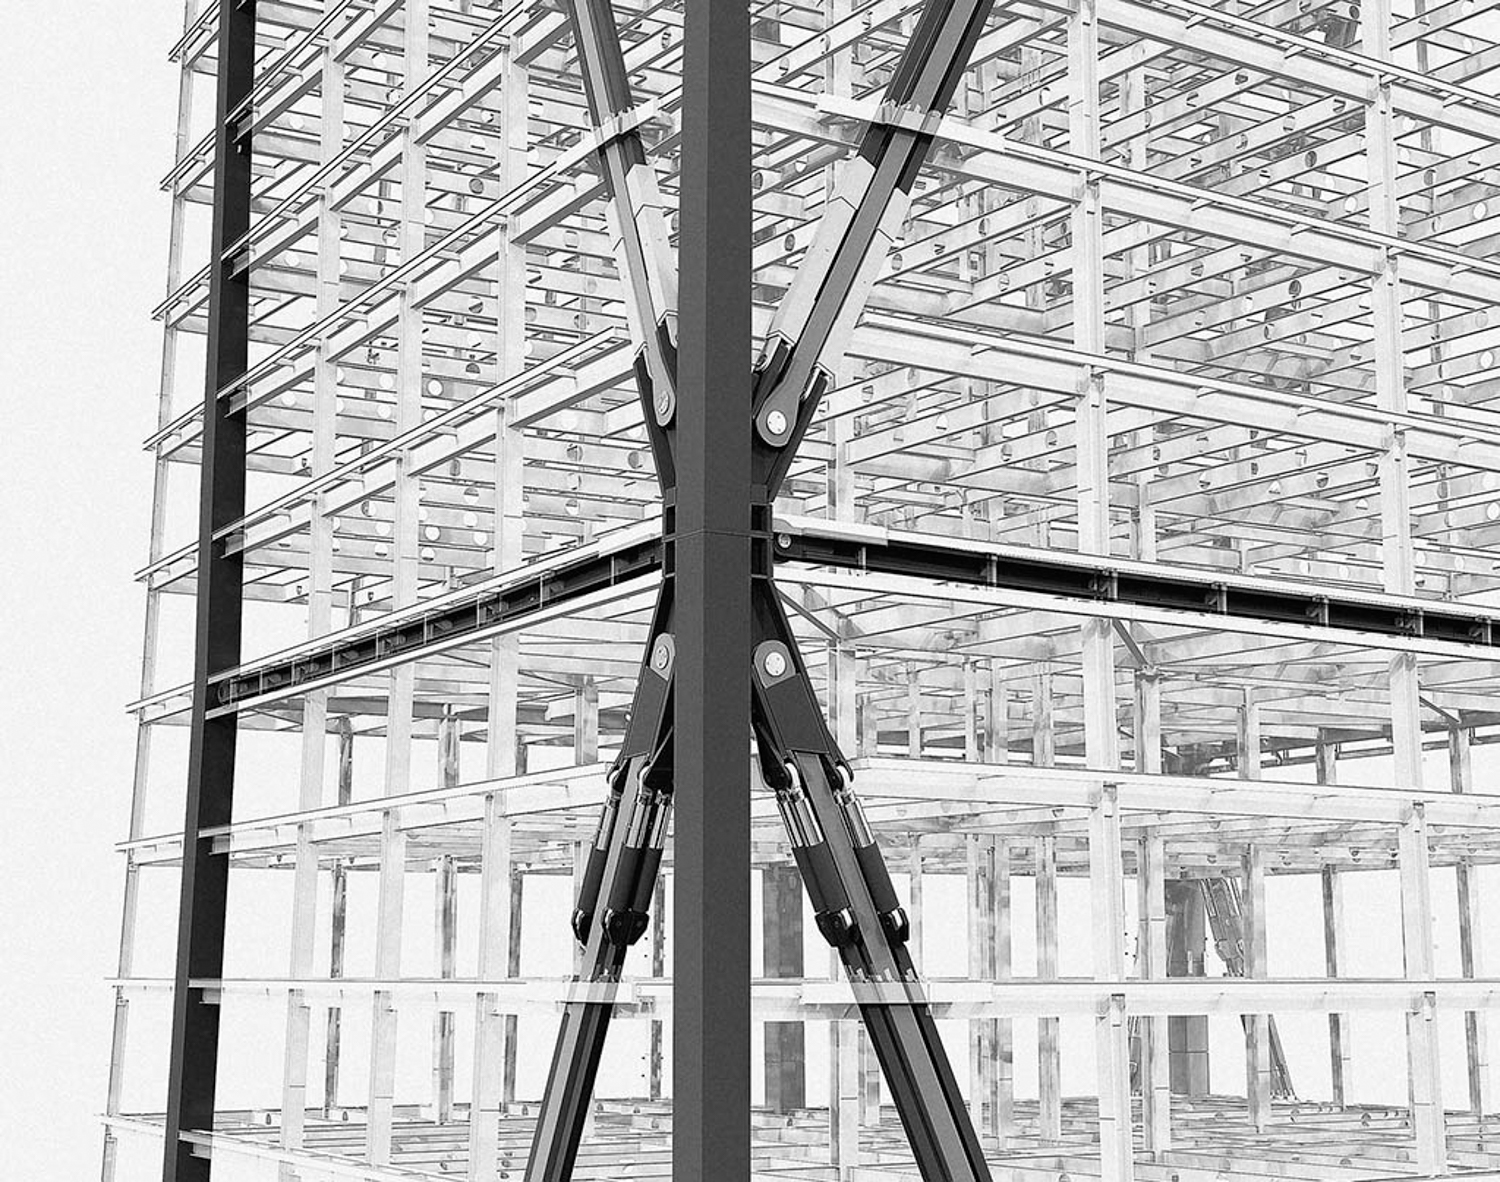 Skeletal illustration of the 181 Fremont Street steel structure, including the exterior steel beams which contribute to the distinct architectural design, image courtesy 181Fremont